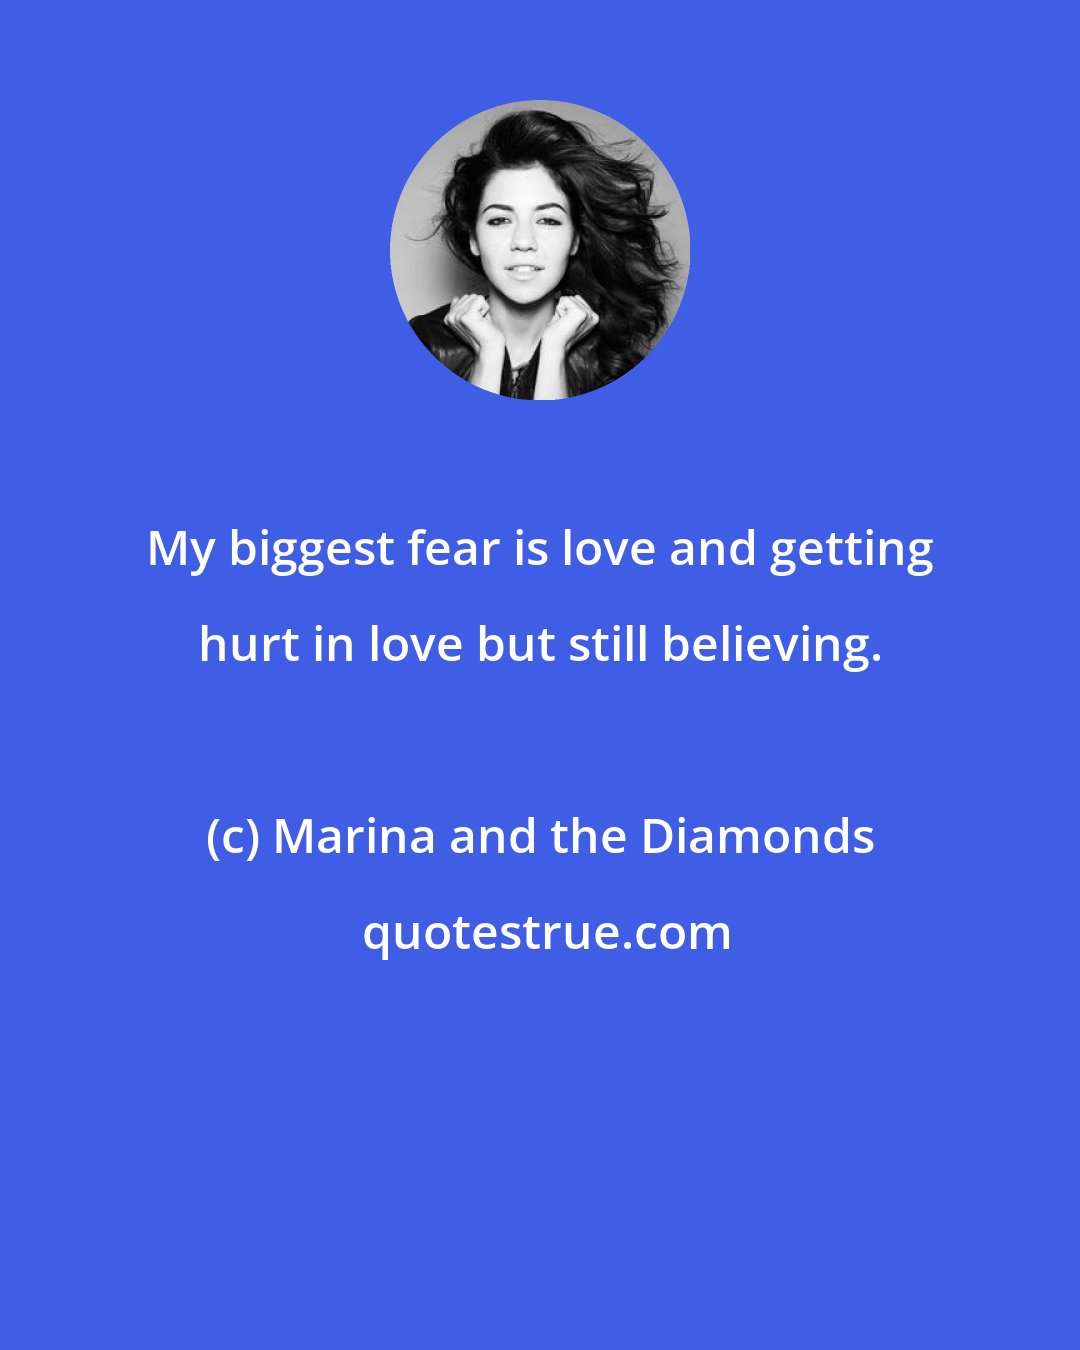 Marina and the Diamonds: My biggest fear is love and getting hurt in love but still believing.